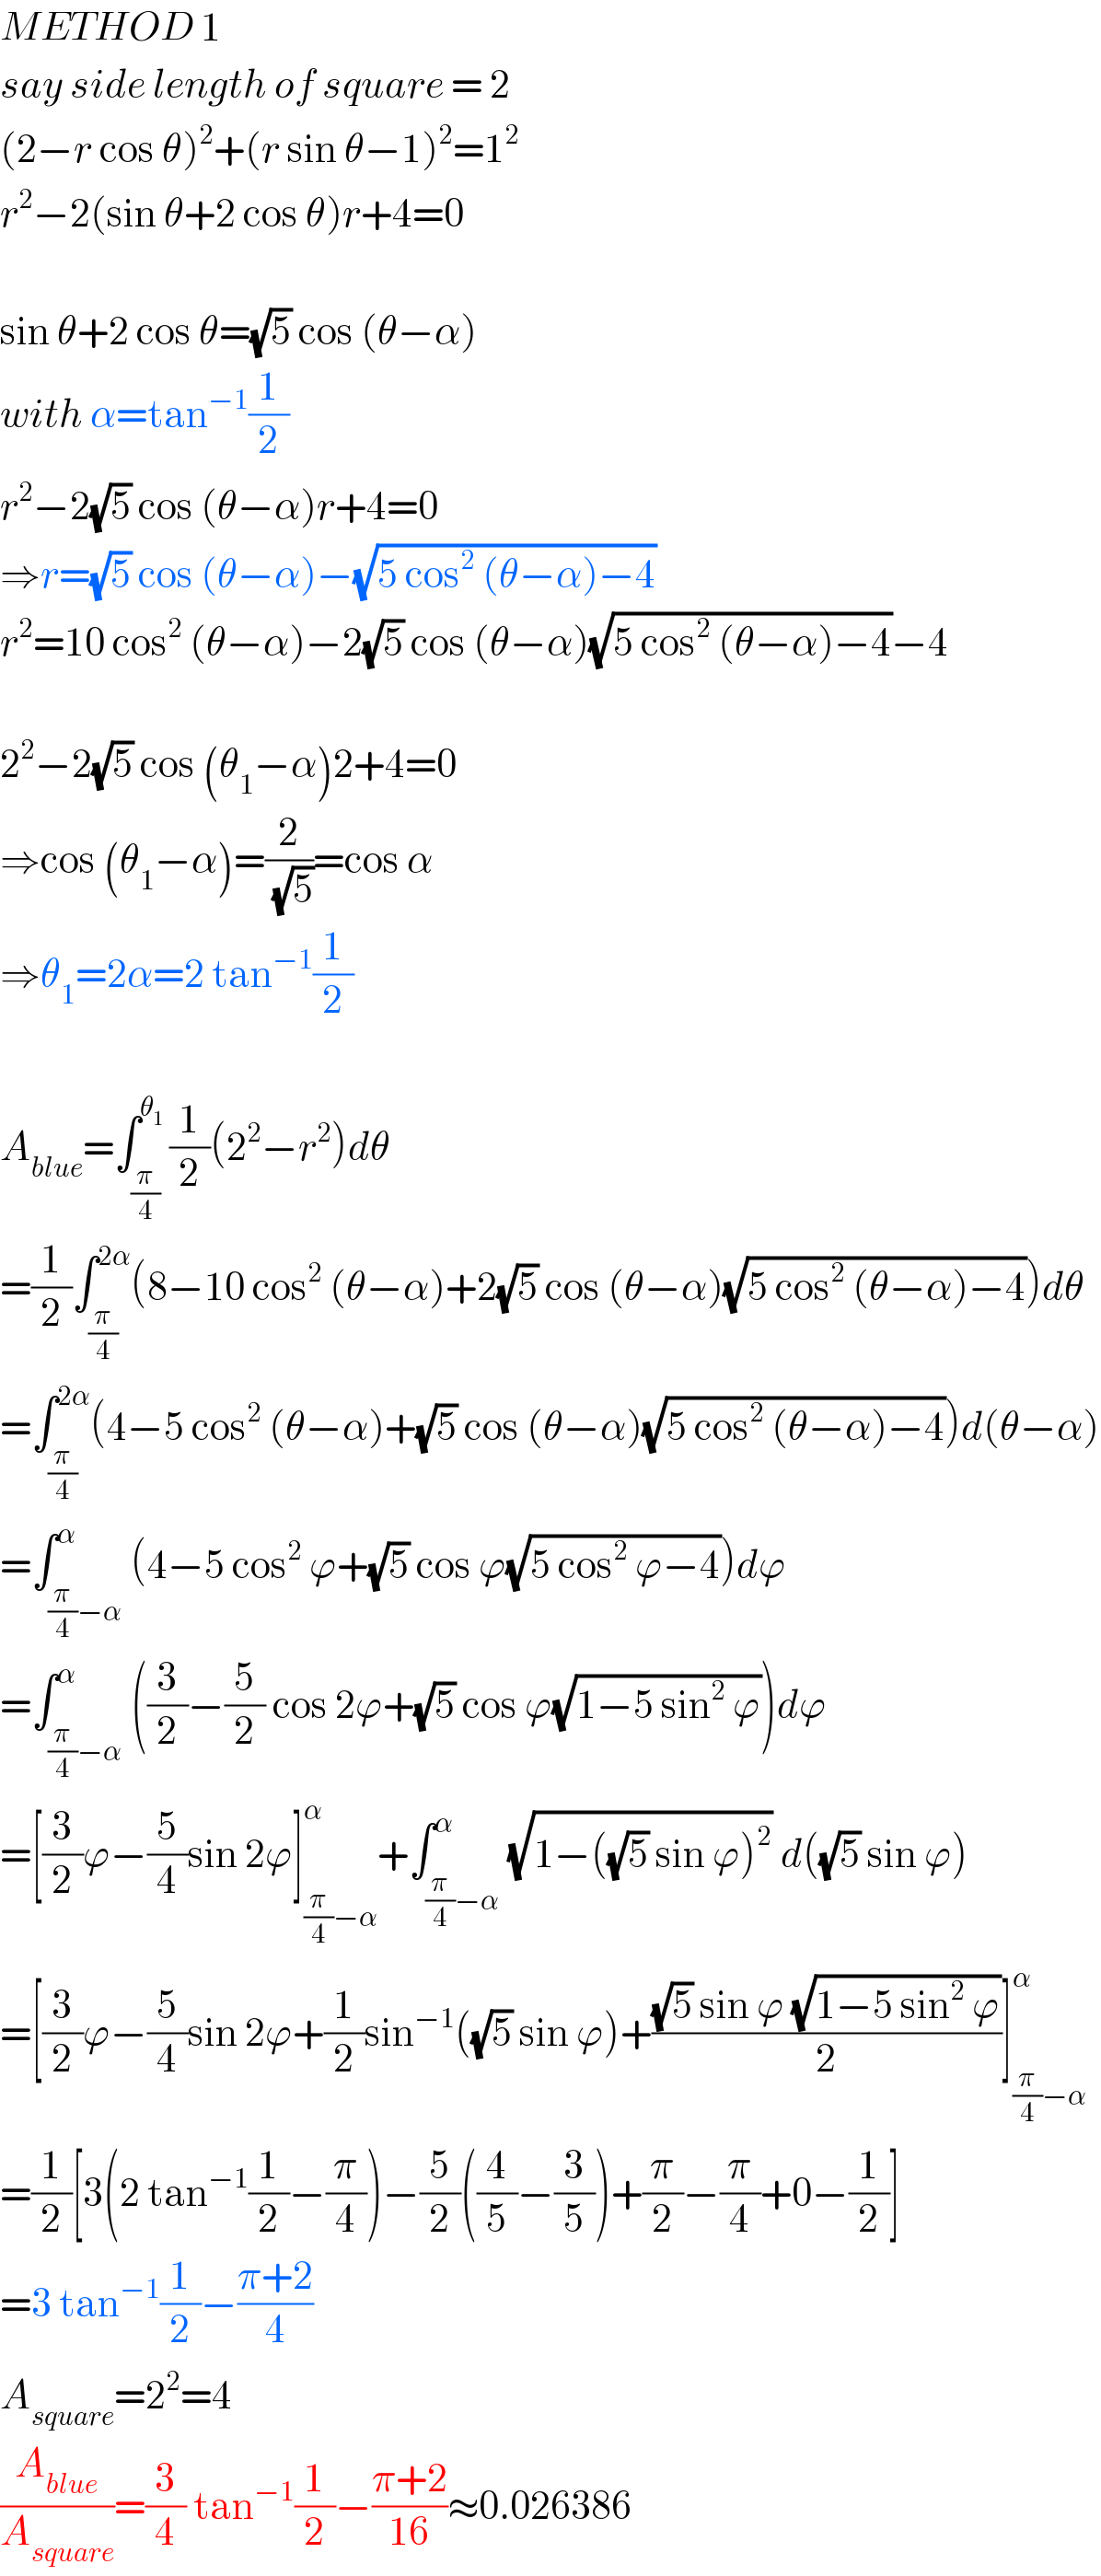 METHOD 1  say side length of square = 2  (2−r cos θ)^2 +(r sin θ−1)^2 =1^2   r^2 −2(sin θ+2 cos θ)r+4=0    sin θ+2 cos θ=(√5) cos (θ−α)  with α=tan^(−1) (1/2)  r^2 −2(√5) cos (θ−α)r+4=0  ⇒r=(√5) cos (θ−α)−(√(5 cos^2  (θ−α)−4))  r^2 =10 cos^2  (θ−α)−2(√5) cos (θ−α)(√(5 cos^2  (θ−α)−4))−4    2^2 −2(√5) cos (θ_1 −α)2+4=0  ⇒cos (θ_1 −α)=(2/(√5))=cos α  ⇒θ_1 =2α=2 tan^(−1) (1/2)    A_(blue) =∫_(π/4) ^θ_1  (1/2)(2^2 −r^2 )dθ  =(1/2)∫_(π/4) ^(2α) (8−10 cos^2  (θ−α)+2(√5) cos (θ−α)(√(5 cos^2  (θ−α)−4)))dθ  =∫_(π/4) ^(2α) (4−5 cos^2  (θ−α)+(√5) cos (θ−α)(√(5 cos^2  (θ−α)−4)))d(θ−α)  =∫_((π/4)−α) ^α (4−5 cos^2  ϕ+(√5) cos ϕ(√(5 cos^2  ϕ−4)))dϕ  =∫_((π/4)−α) ^α ((3/2)−(5/2) cos 2ϕ+(√5) cos ϕ(√(1−5 sin^2  ϕ)))dϕ  =[(3/2)ϕ−(5/4)sin 2ϕ]_((π/4)−α) ^α +∫_((π/4)−α) ^α (√(1−((√5) sin ϕ)^2 )) d((√5) sin ϕ)  =[(3/2)ϕ−(5/4)sin 2ϕ+(1/2)sin^(−1) ((√5) sin ϕ)+(((√5) sin ϕ (√(1−5 sin^2  ϕ)))/2)]_((π/4)−α) ^α   =(1/2)[3(2 tan^(−1) (1/2)−(π/4))−(5/2)((4/5)−(3/5))+(π/2)−(π/4)+0−(1/2)]  =3 tan^(−1) (1/2)−((π+2)/4)  A_(square) =2^2 =4  (A_(blue) /A_(square) )=(3/4) tan^(−1) (1/2)−((π+2)/(16))≈0.026386  